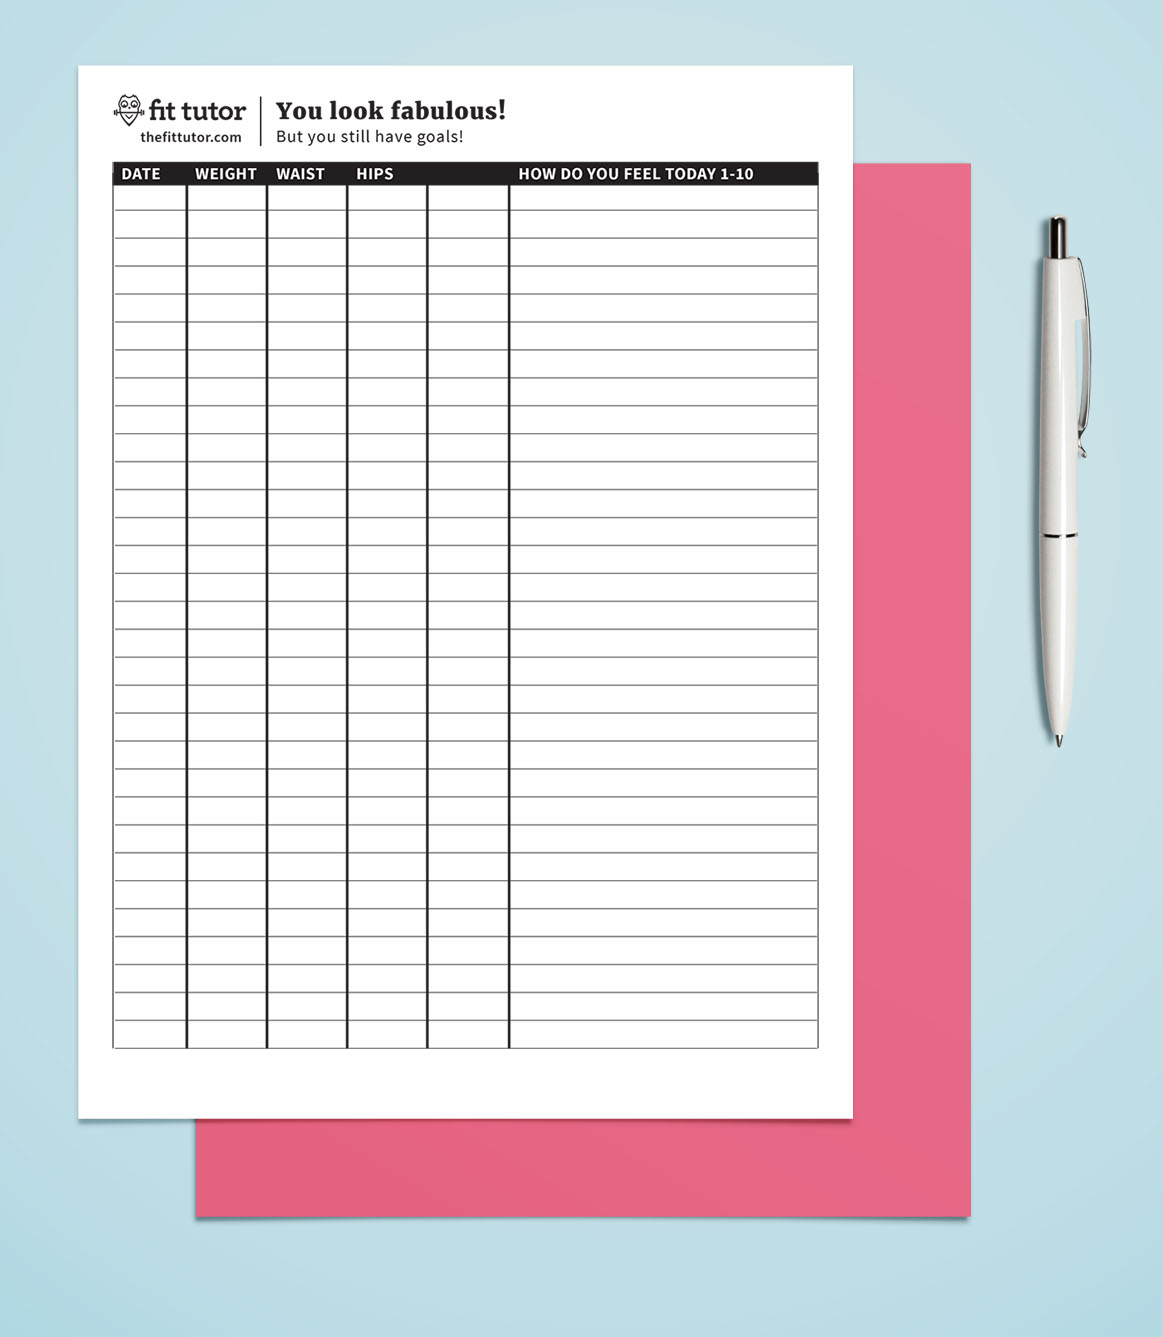 Printable Weight Loss Chart Template